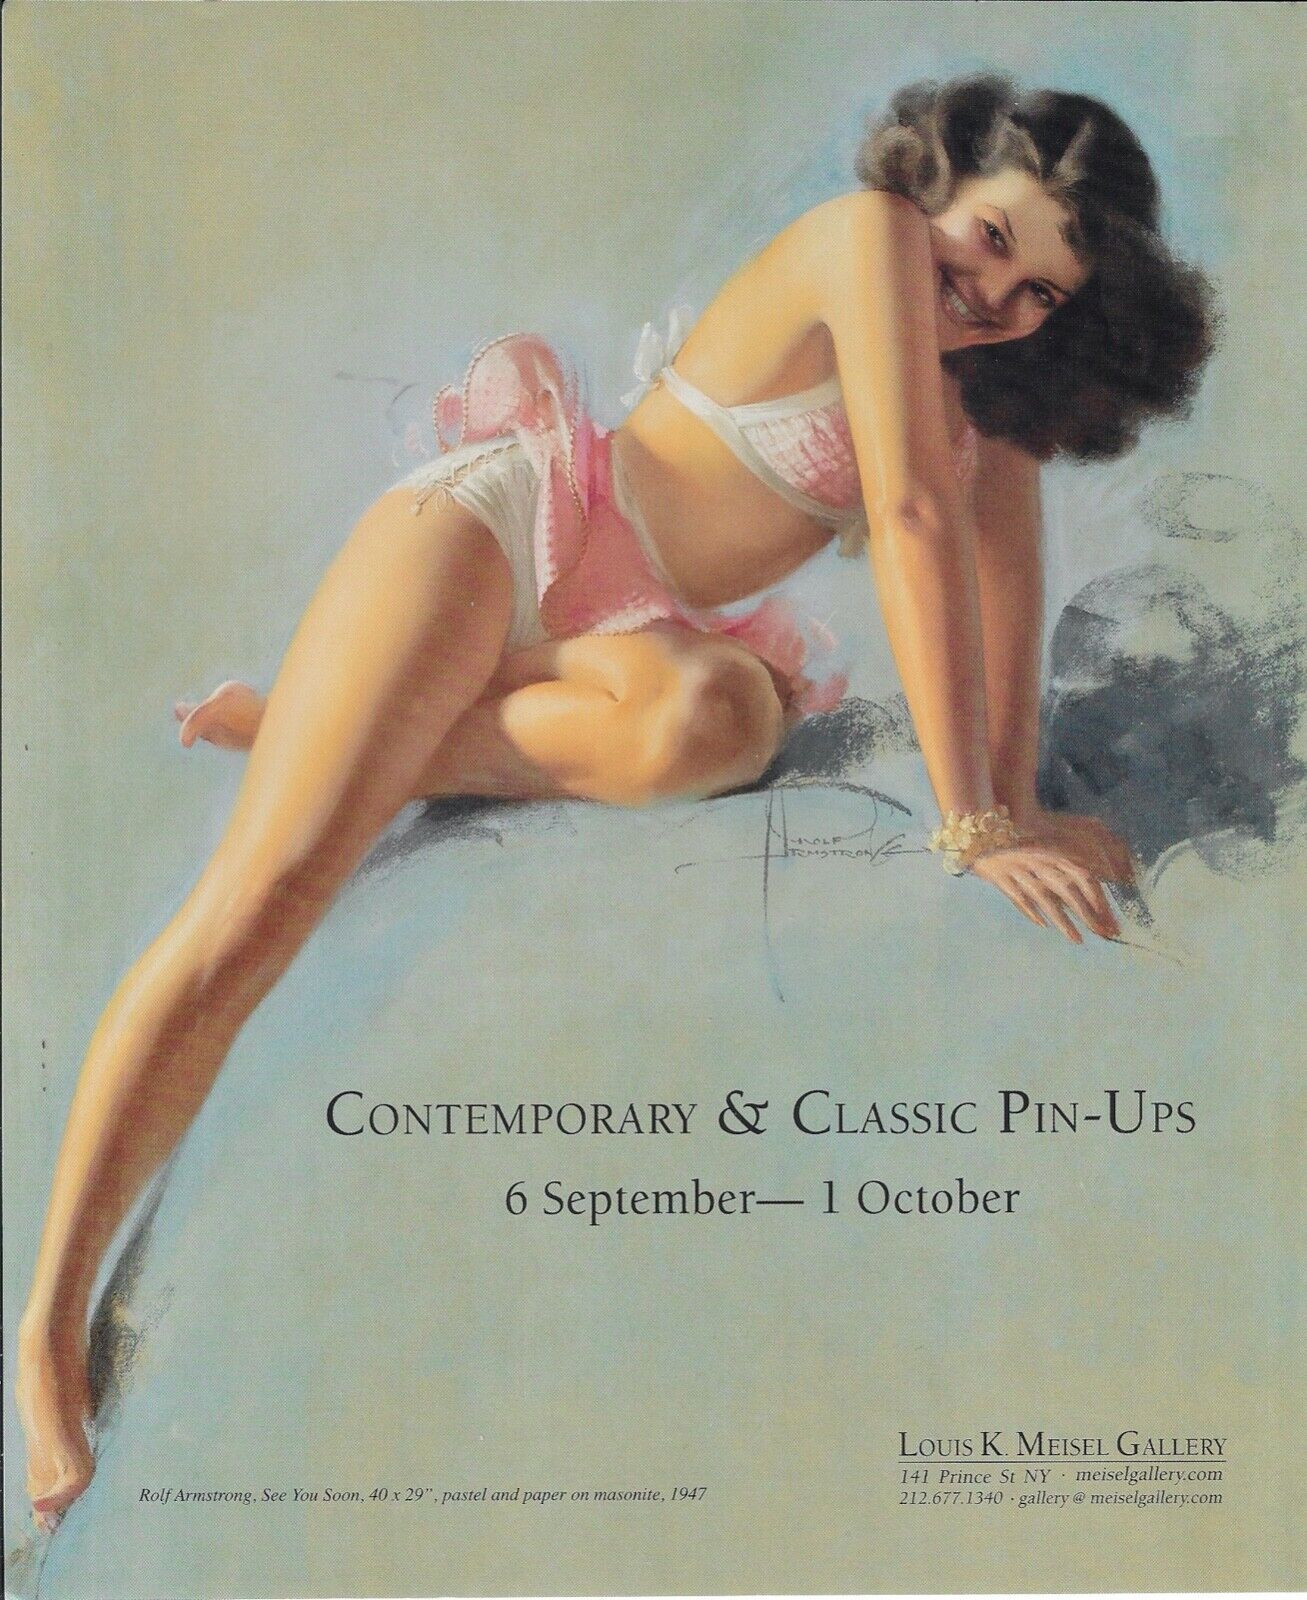 ROLF ARMSTRONG c1947 See You Soon Pinup Art Gallery Exhibit Print Ad~2016